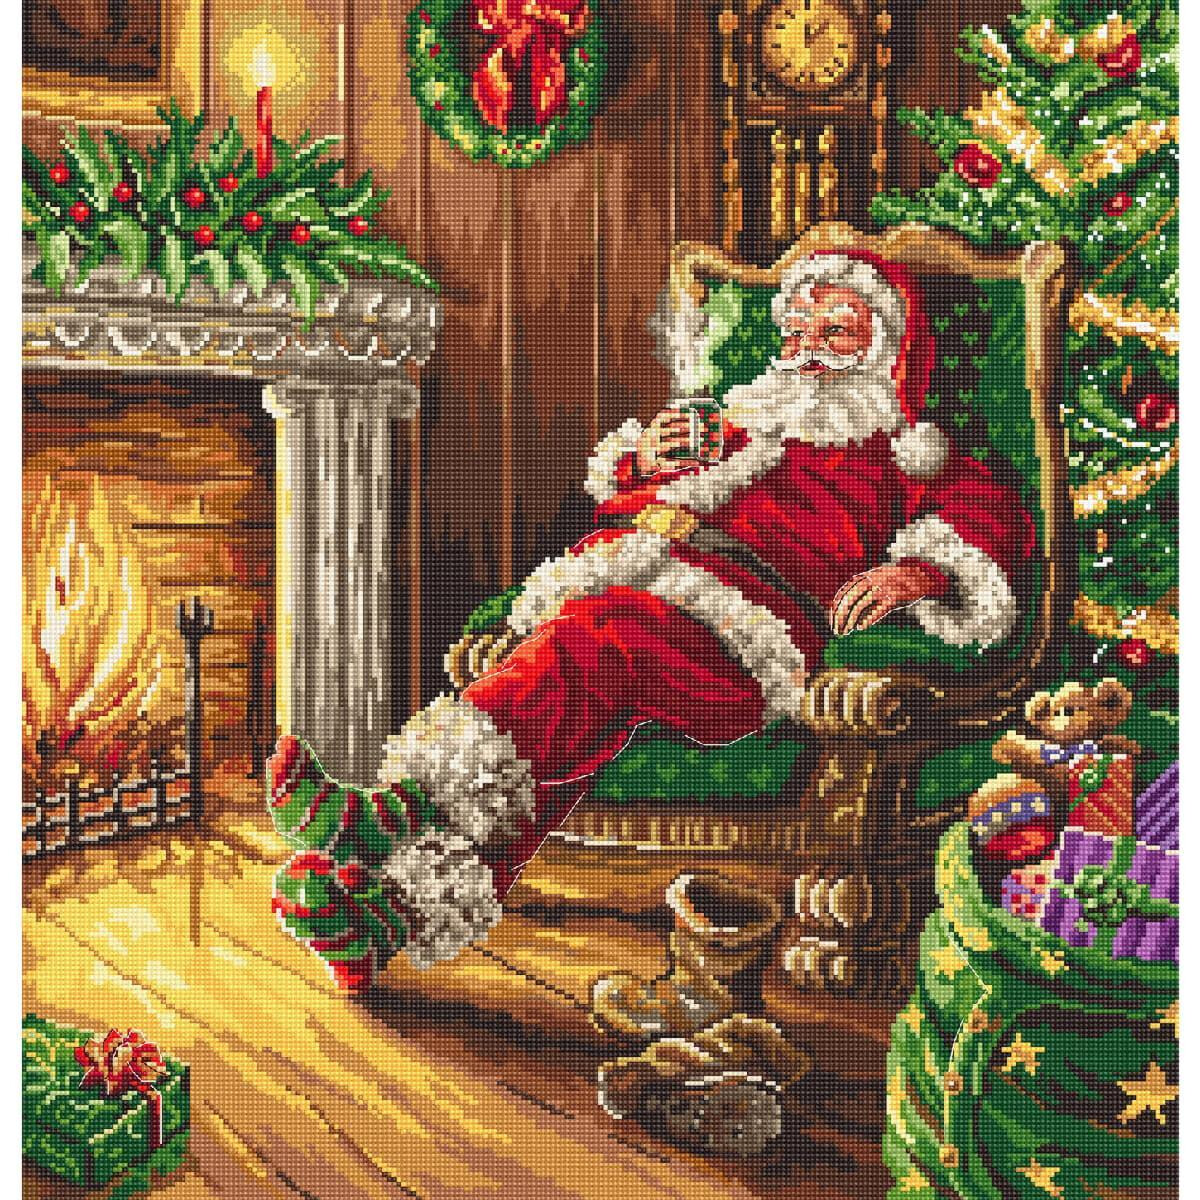 A cozy scene with Santa Claus in a red suit with white...